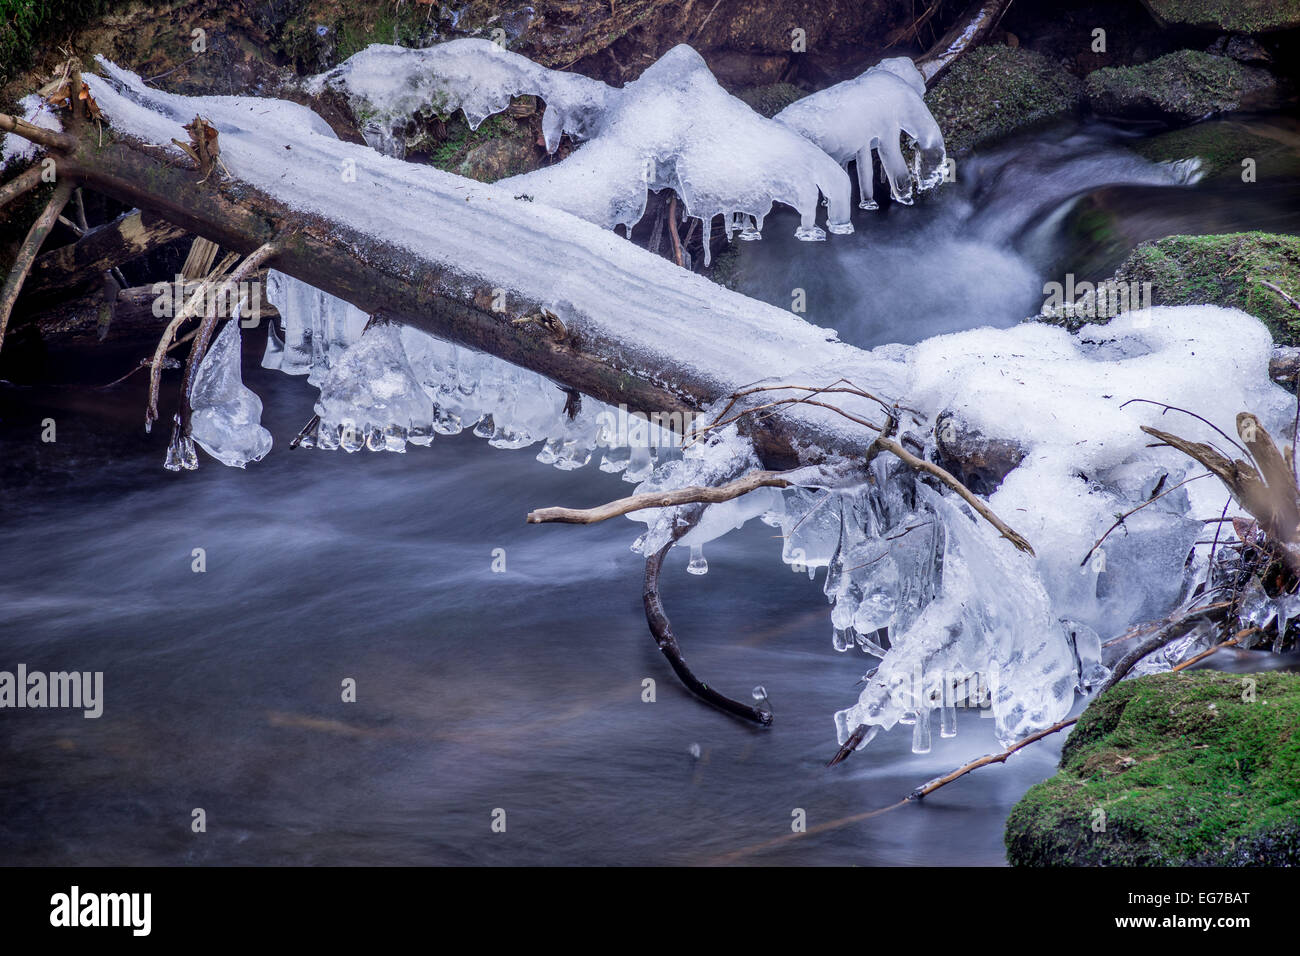 Icicles and snow on stump in flowing water Stock Photo